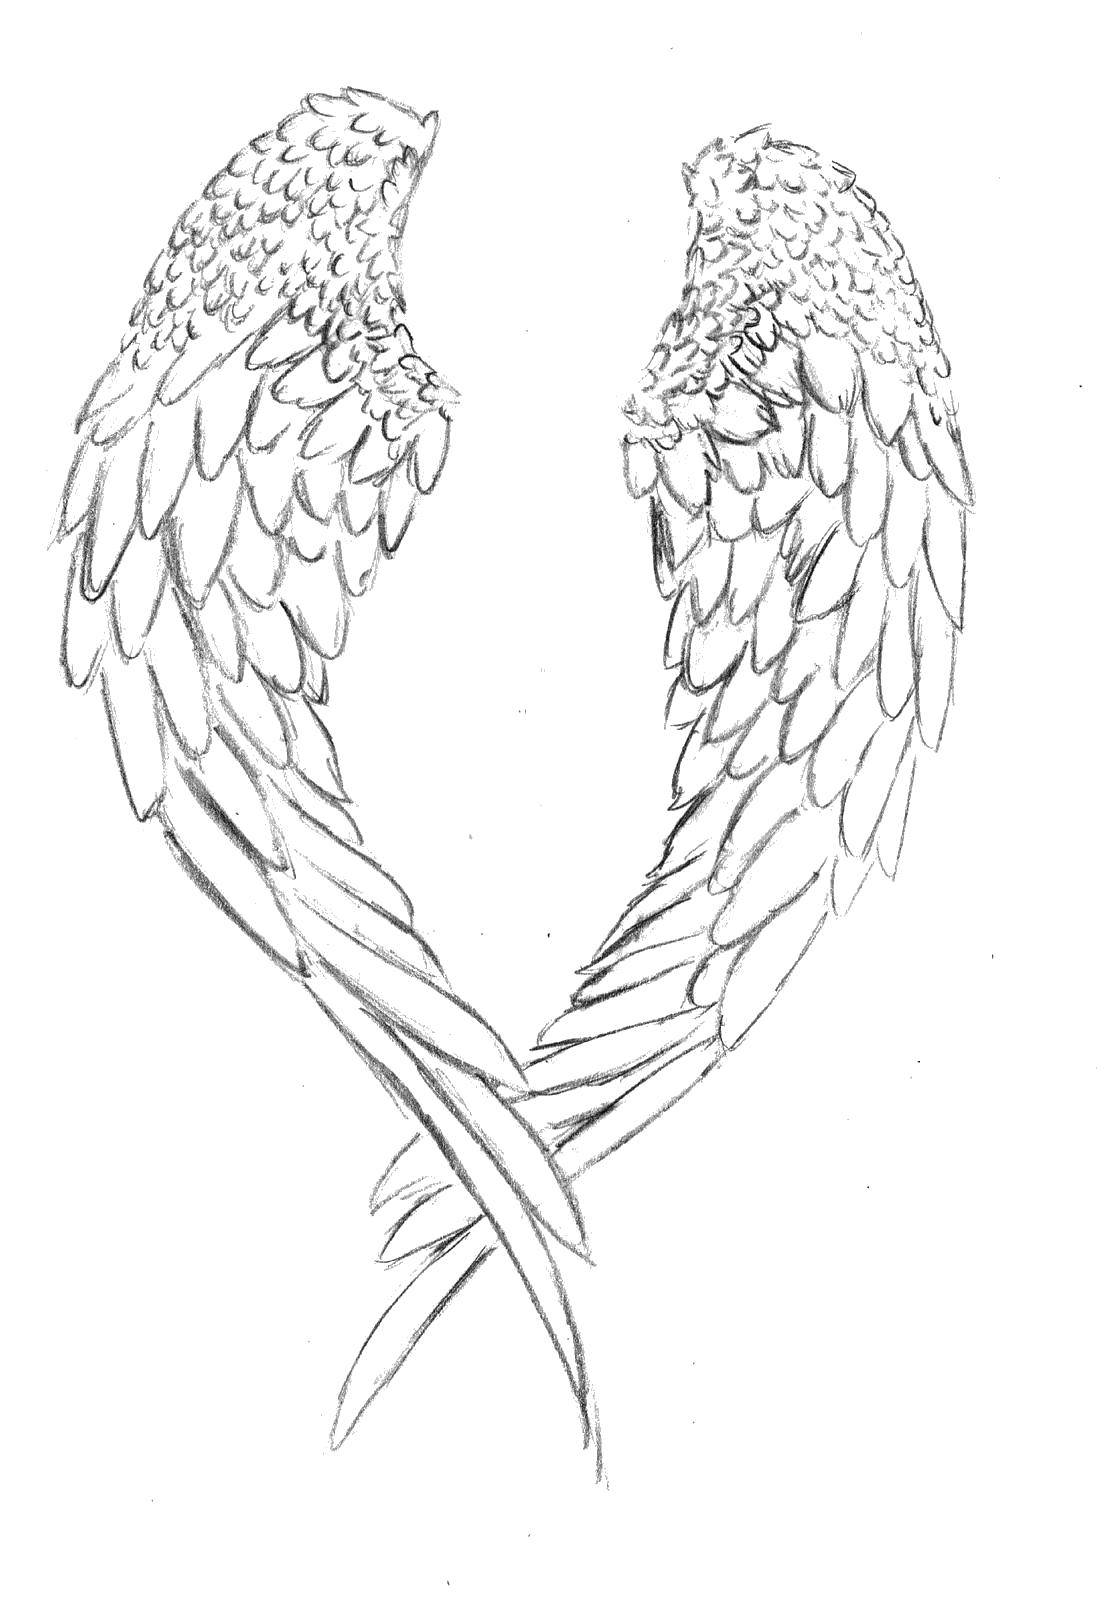 Coloring Wings. Category coloring. Tags:  wings, feathers, wing.